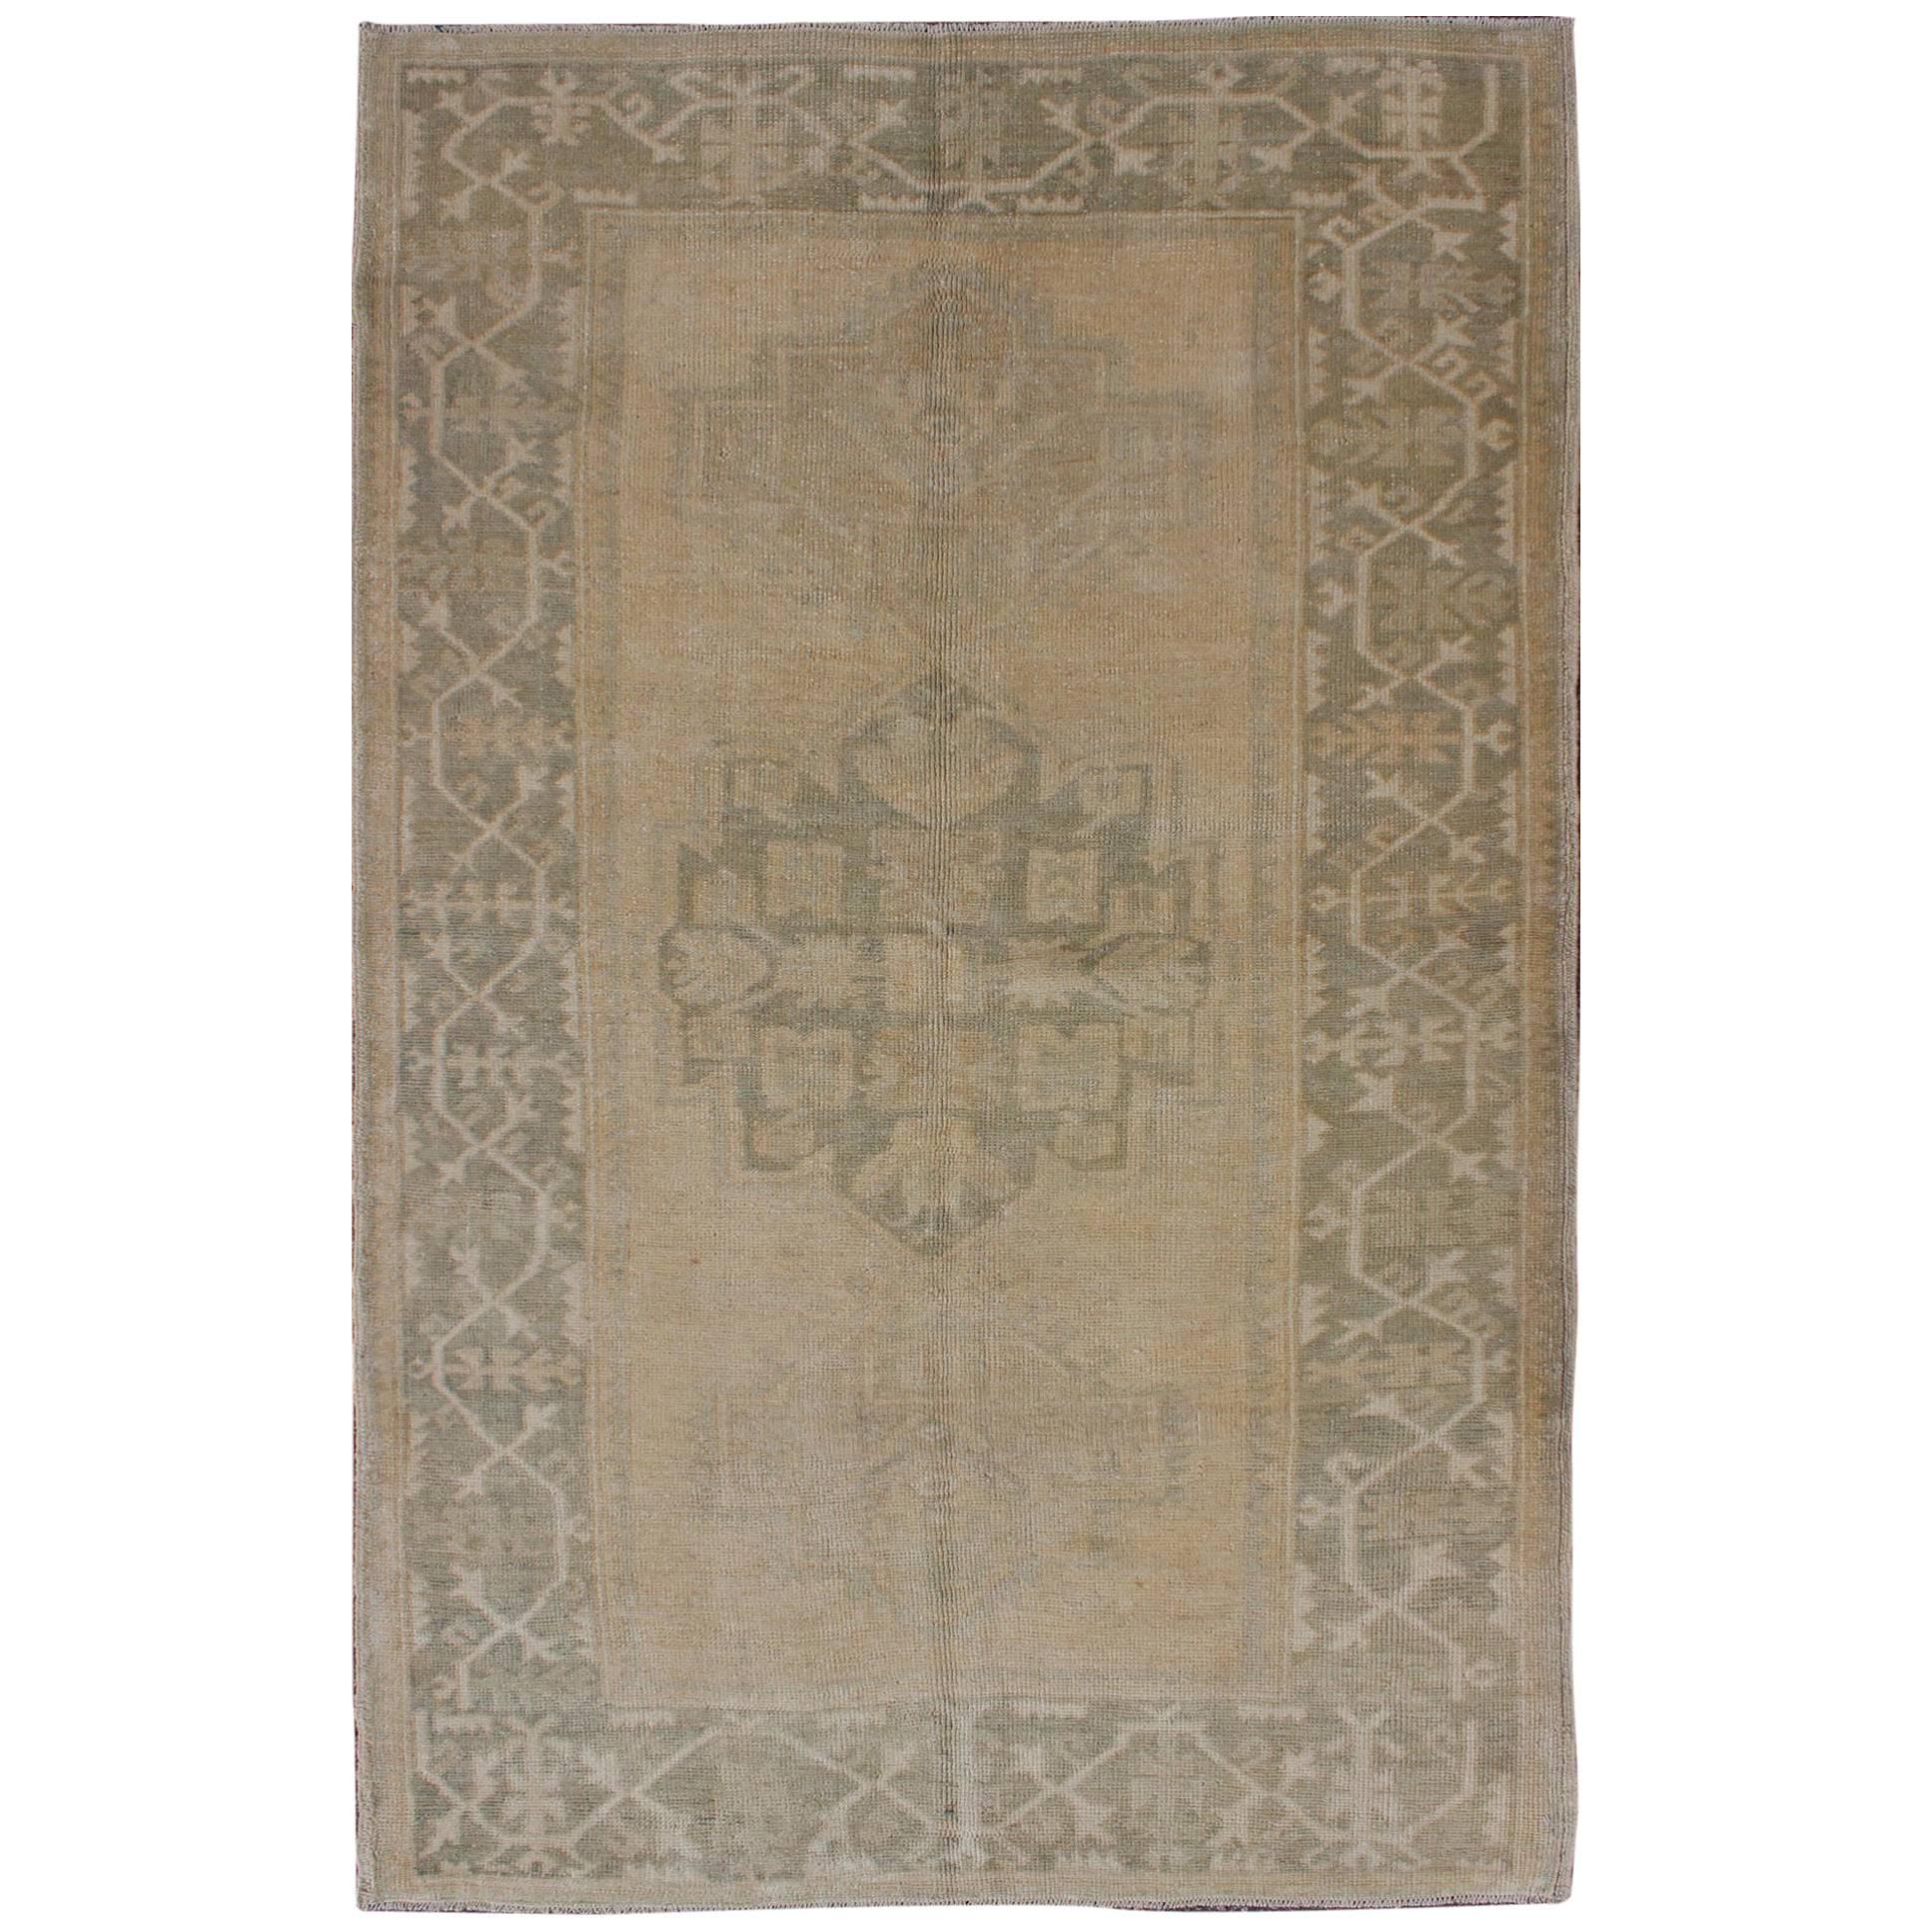 Medallion Vintage Turkish Oushak Rug in Taupe, Green and Sand Colors For Sale